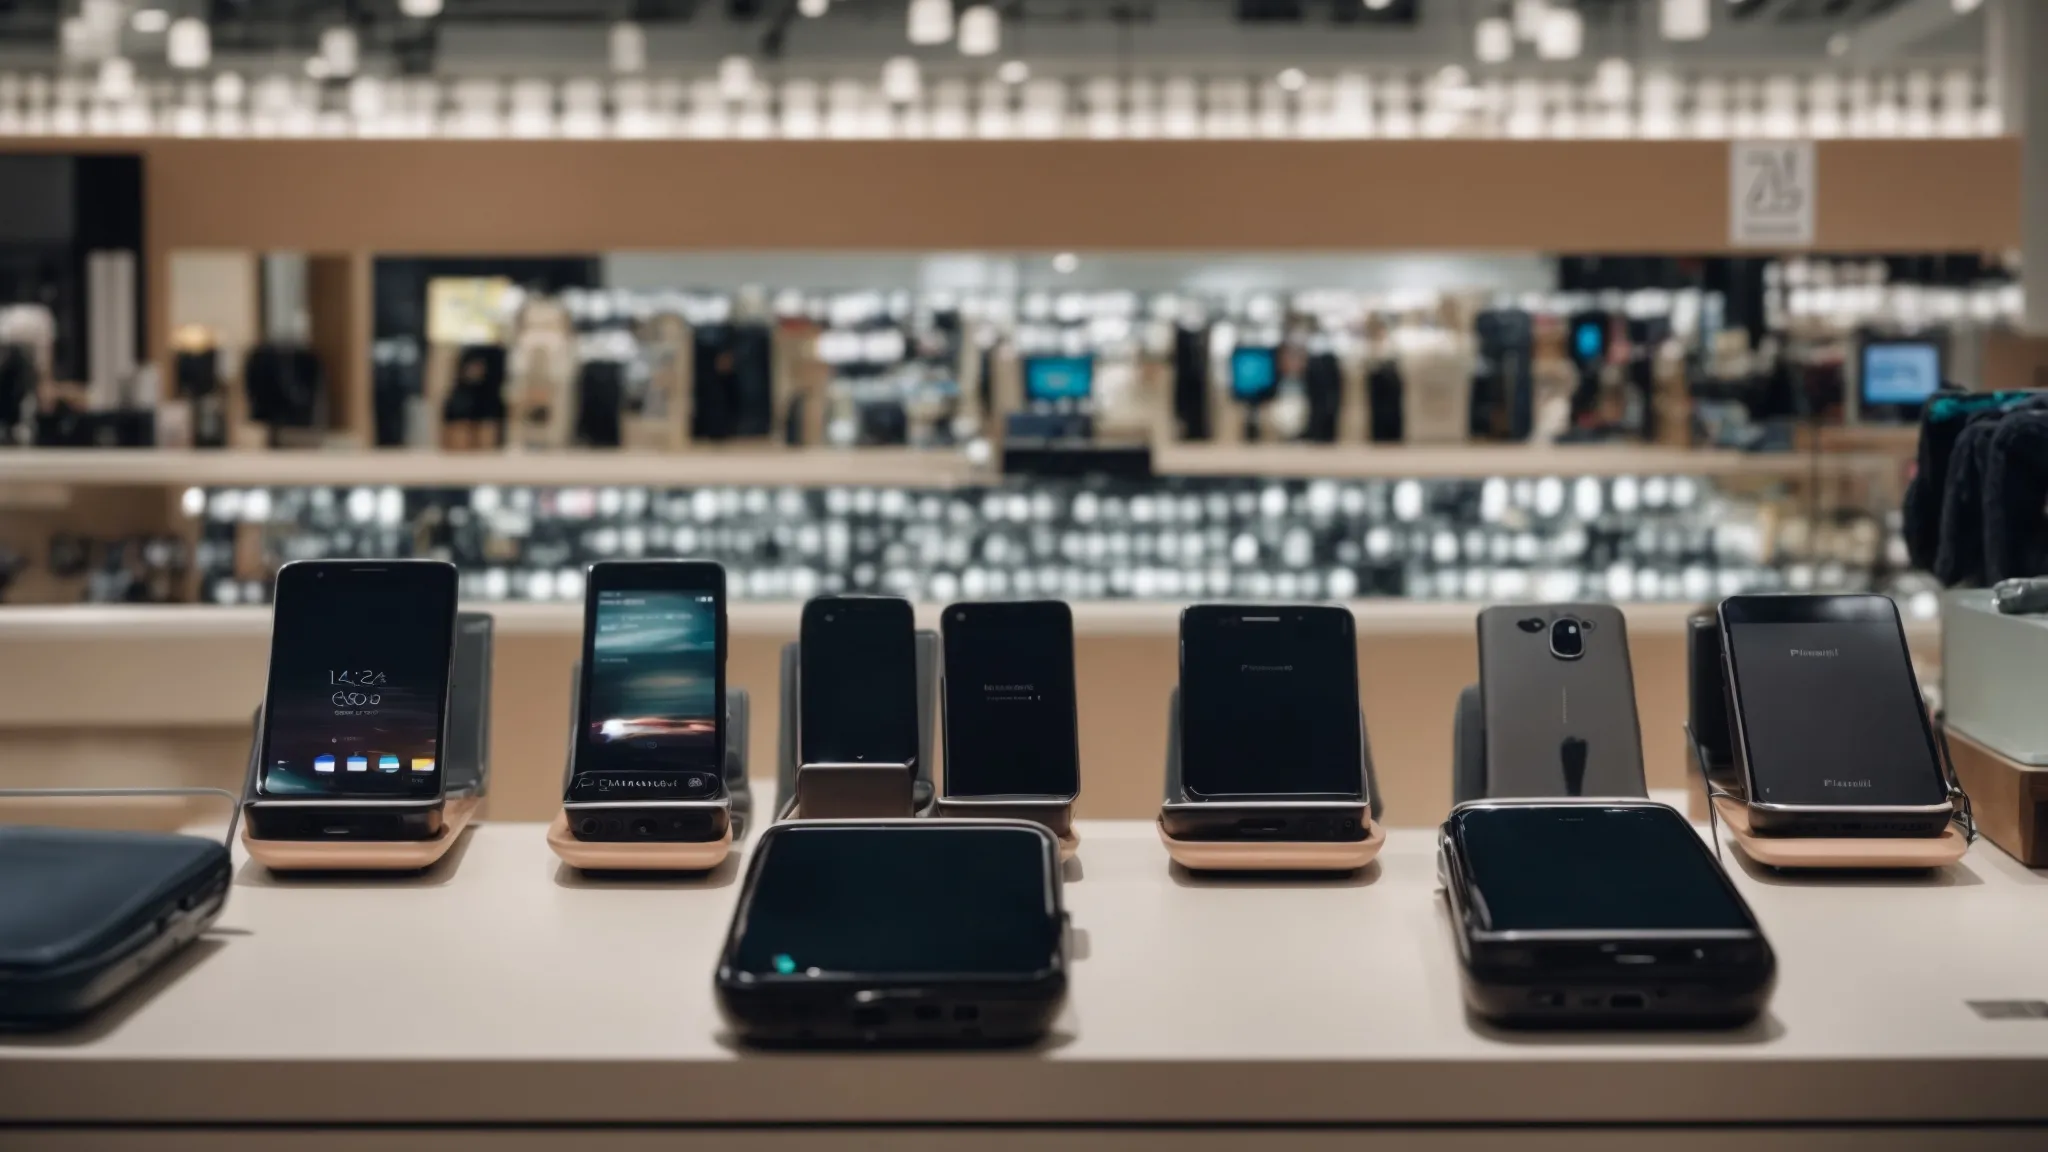 rows of smartphones and accessories displayed in a well-lit retail store.